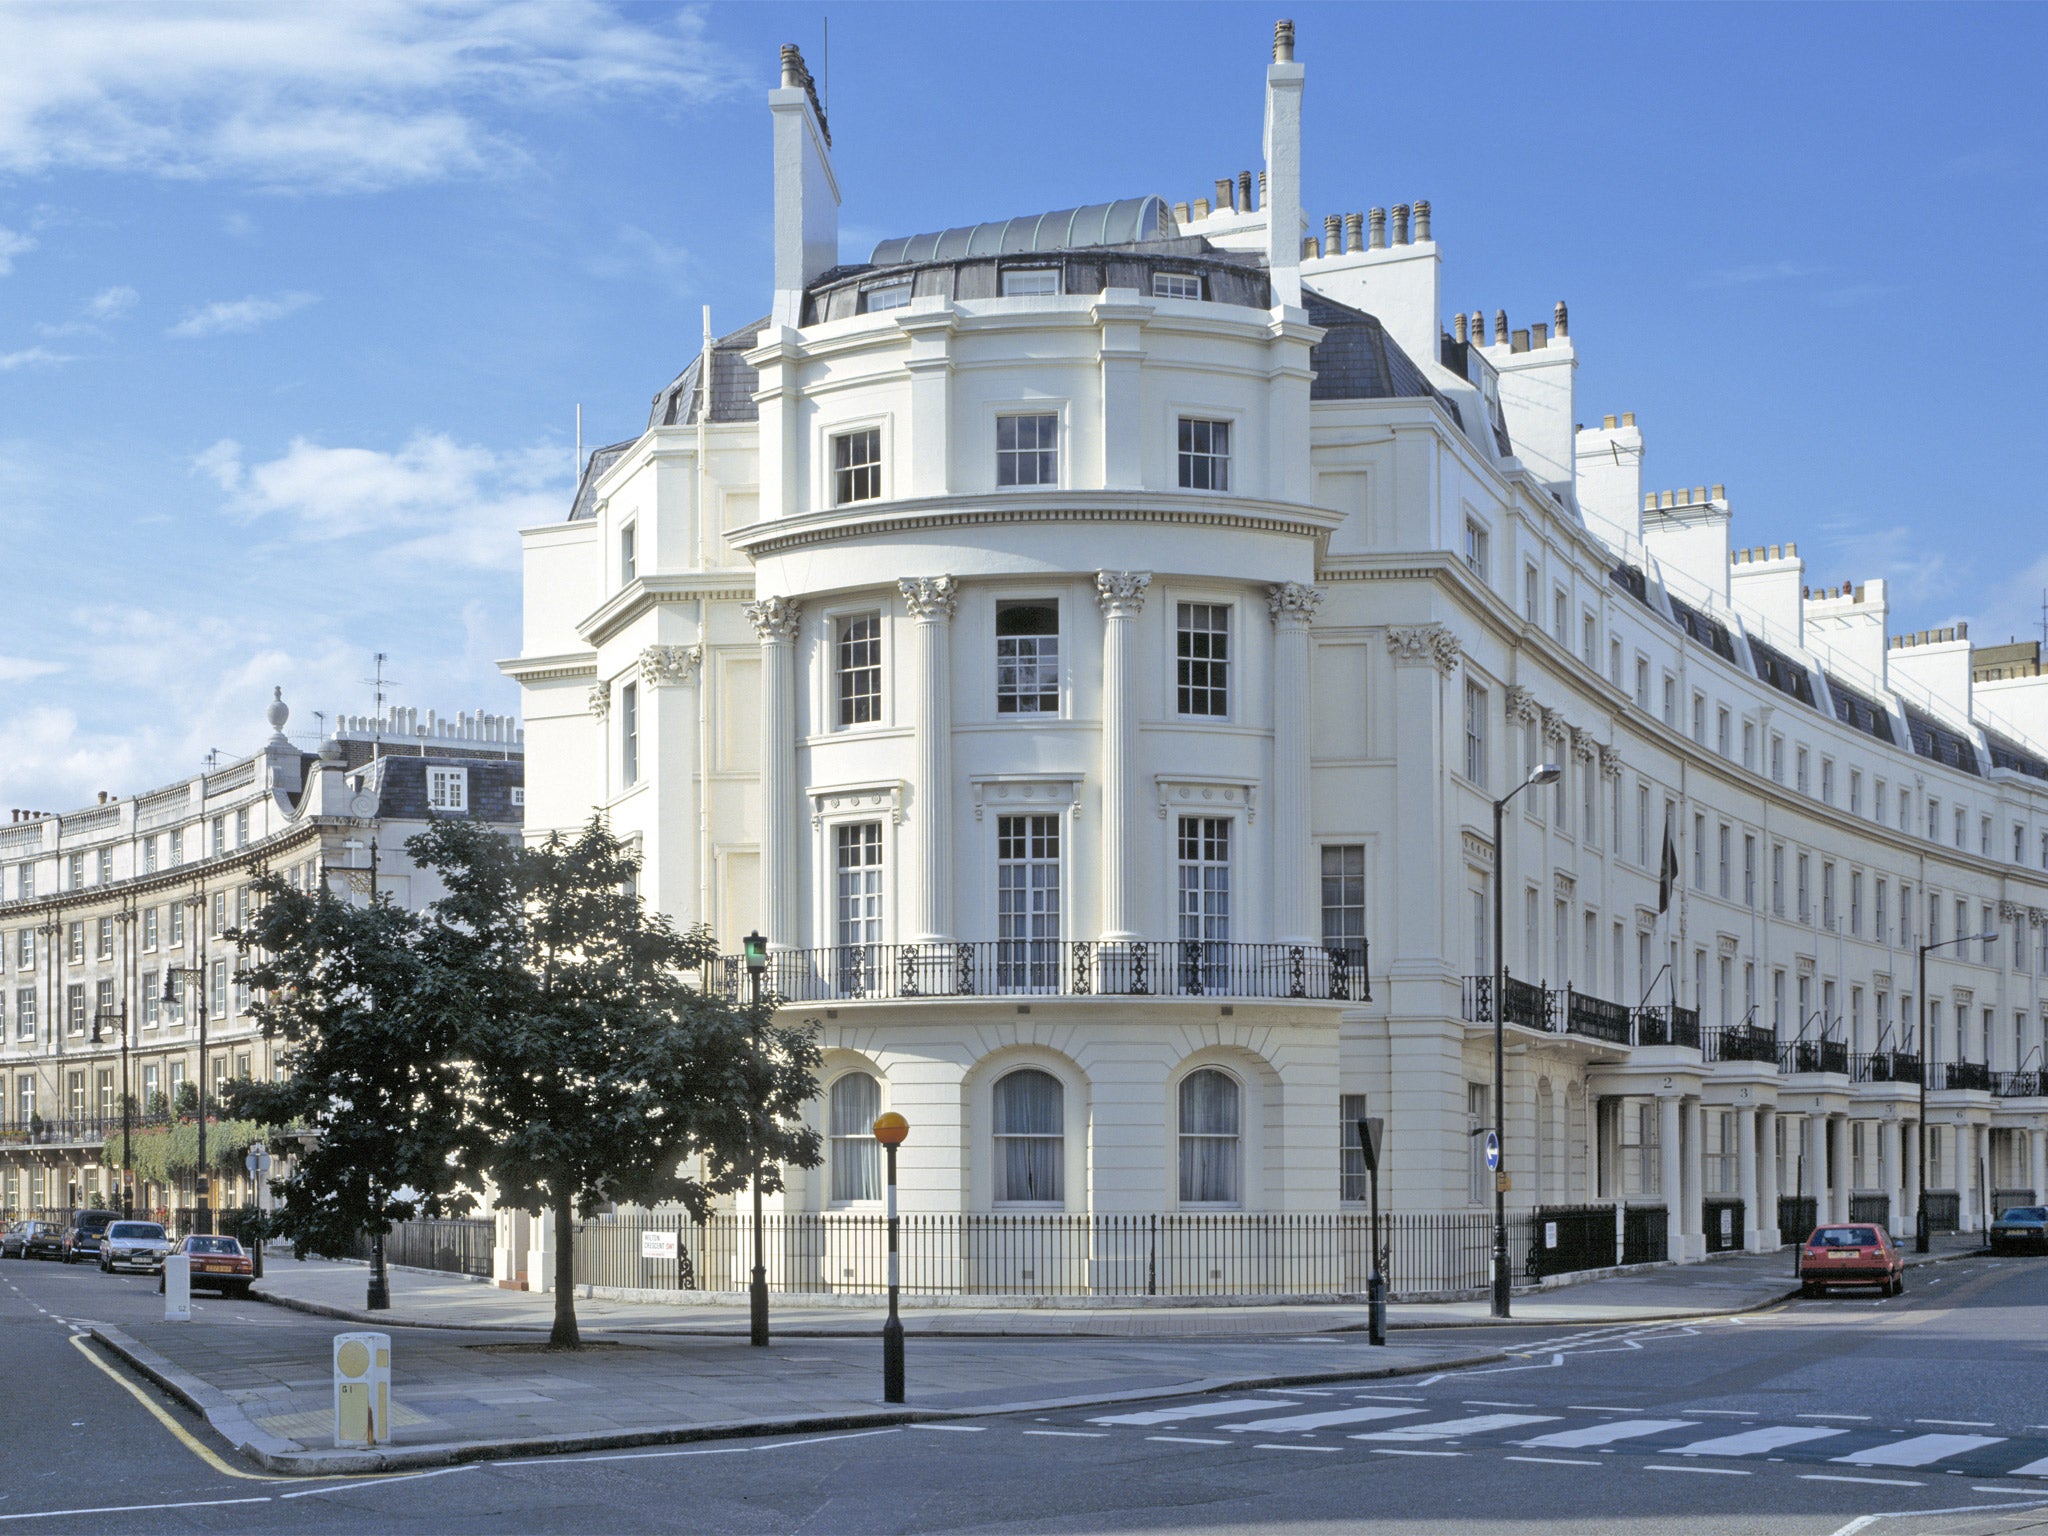 Gennady Bogolyubov’s five-storey mansion in Belgrave Square is one of the few residential properties in the area